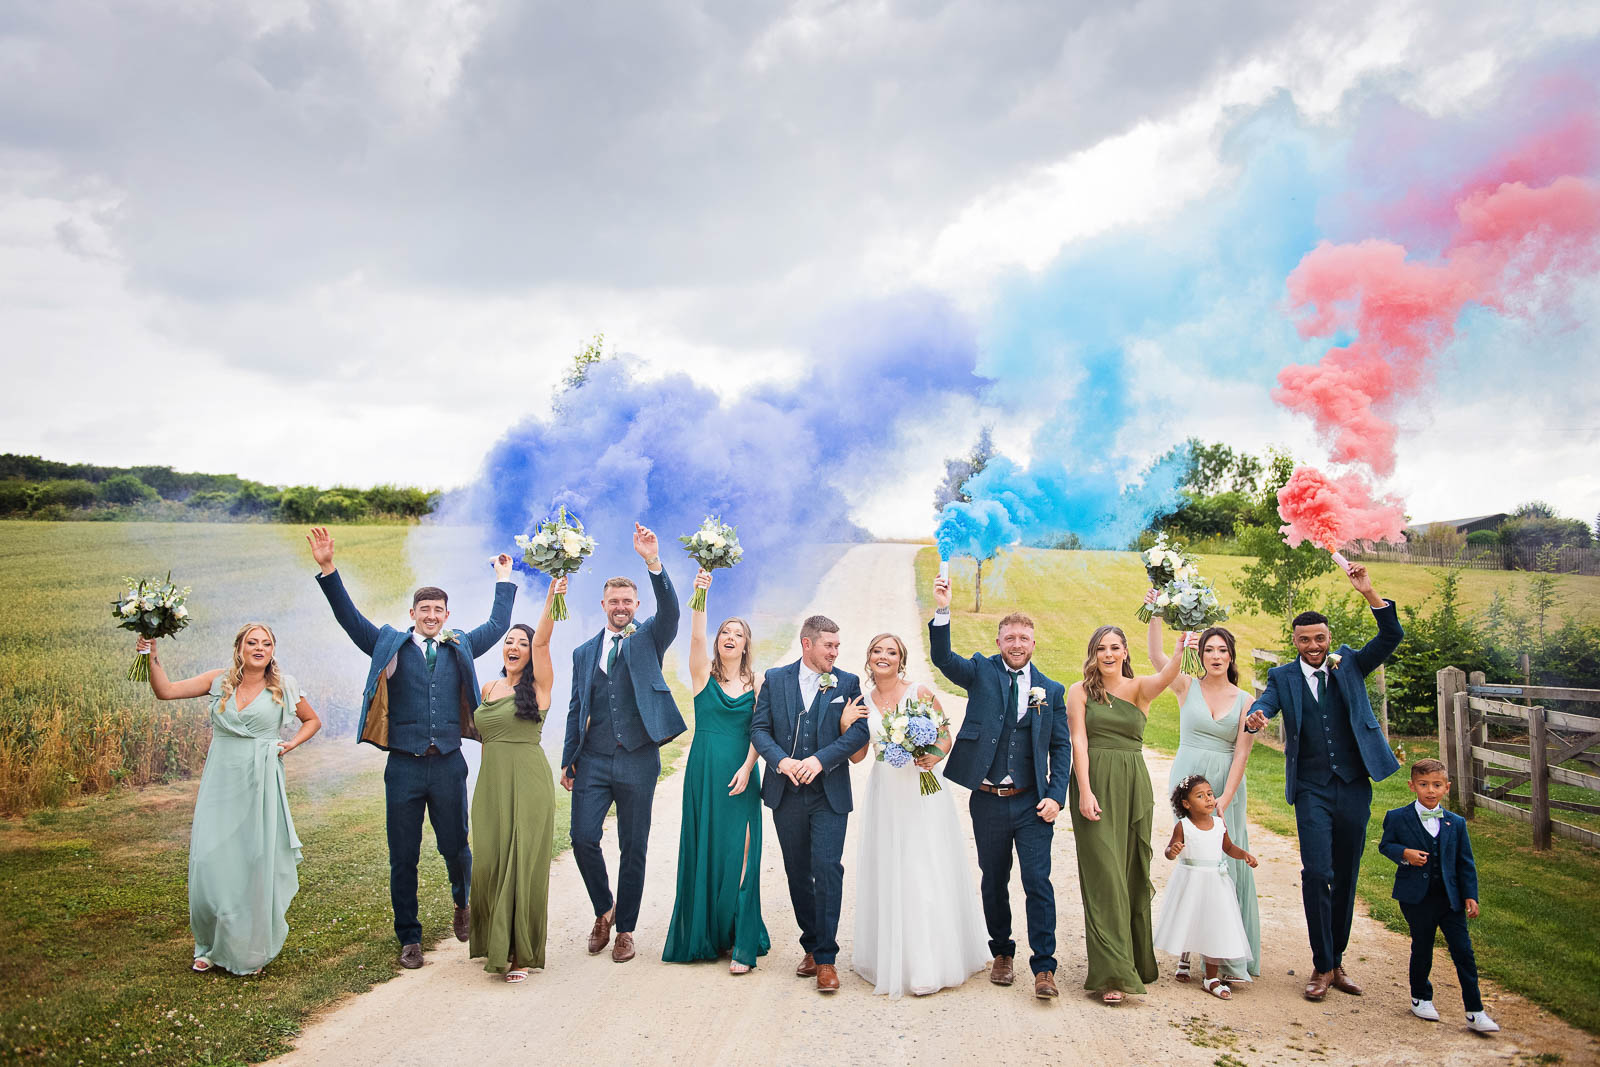 Bridal party walking in fields with coloured smoke bombs